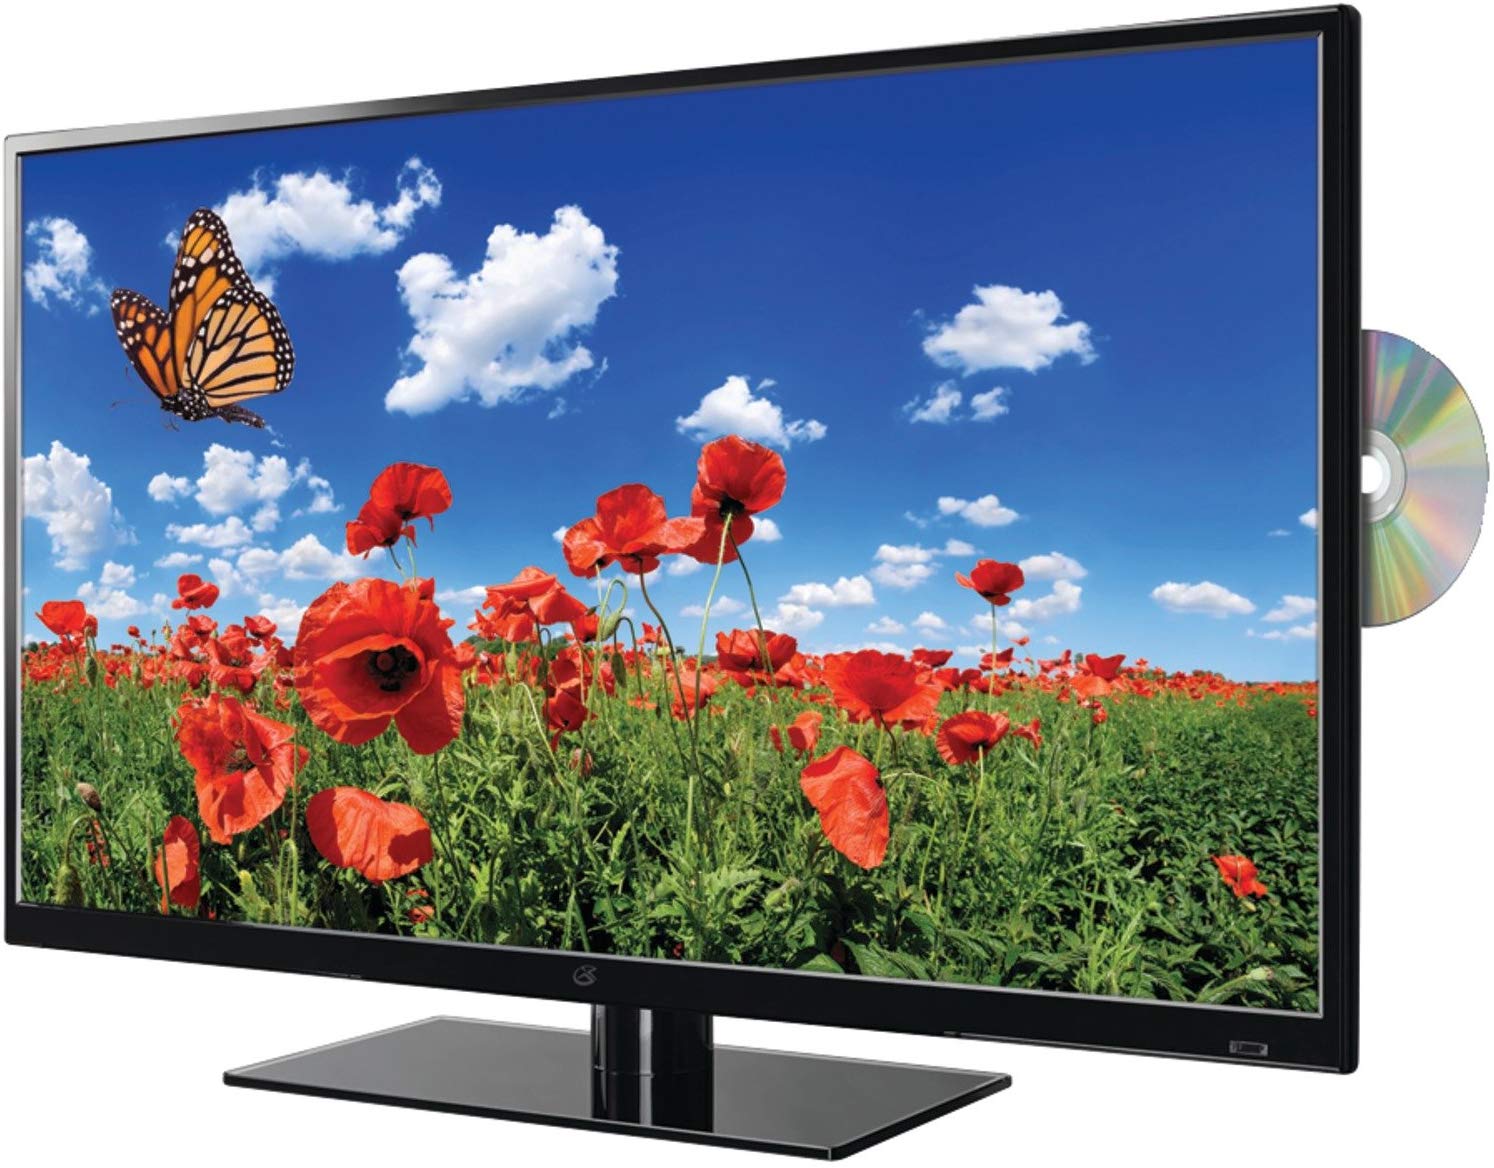 Gpx TDE3274BP 32' 1080p Led Tv And Dvd Combination